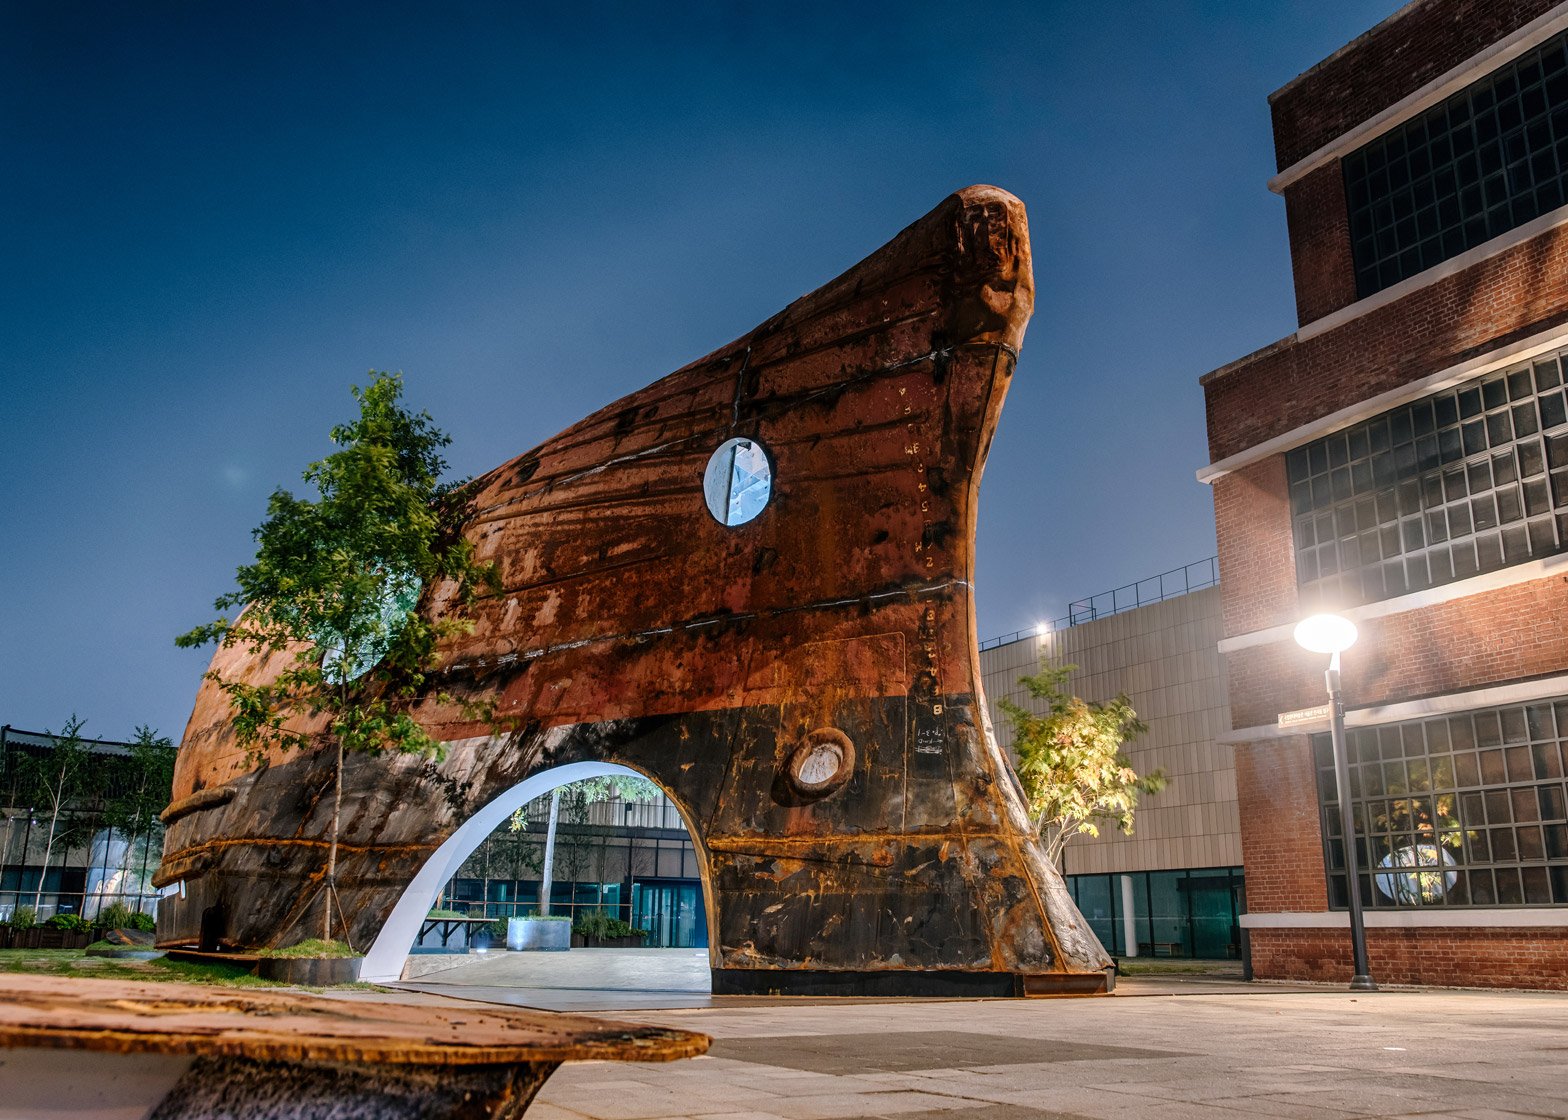 Temp'L by Shinslab Architecture is an installation recycled from a rusty old cargo ship for a museum courtyard in Seoul